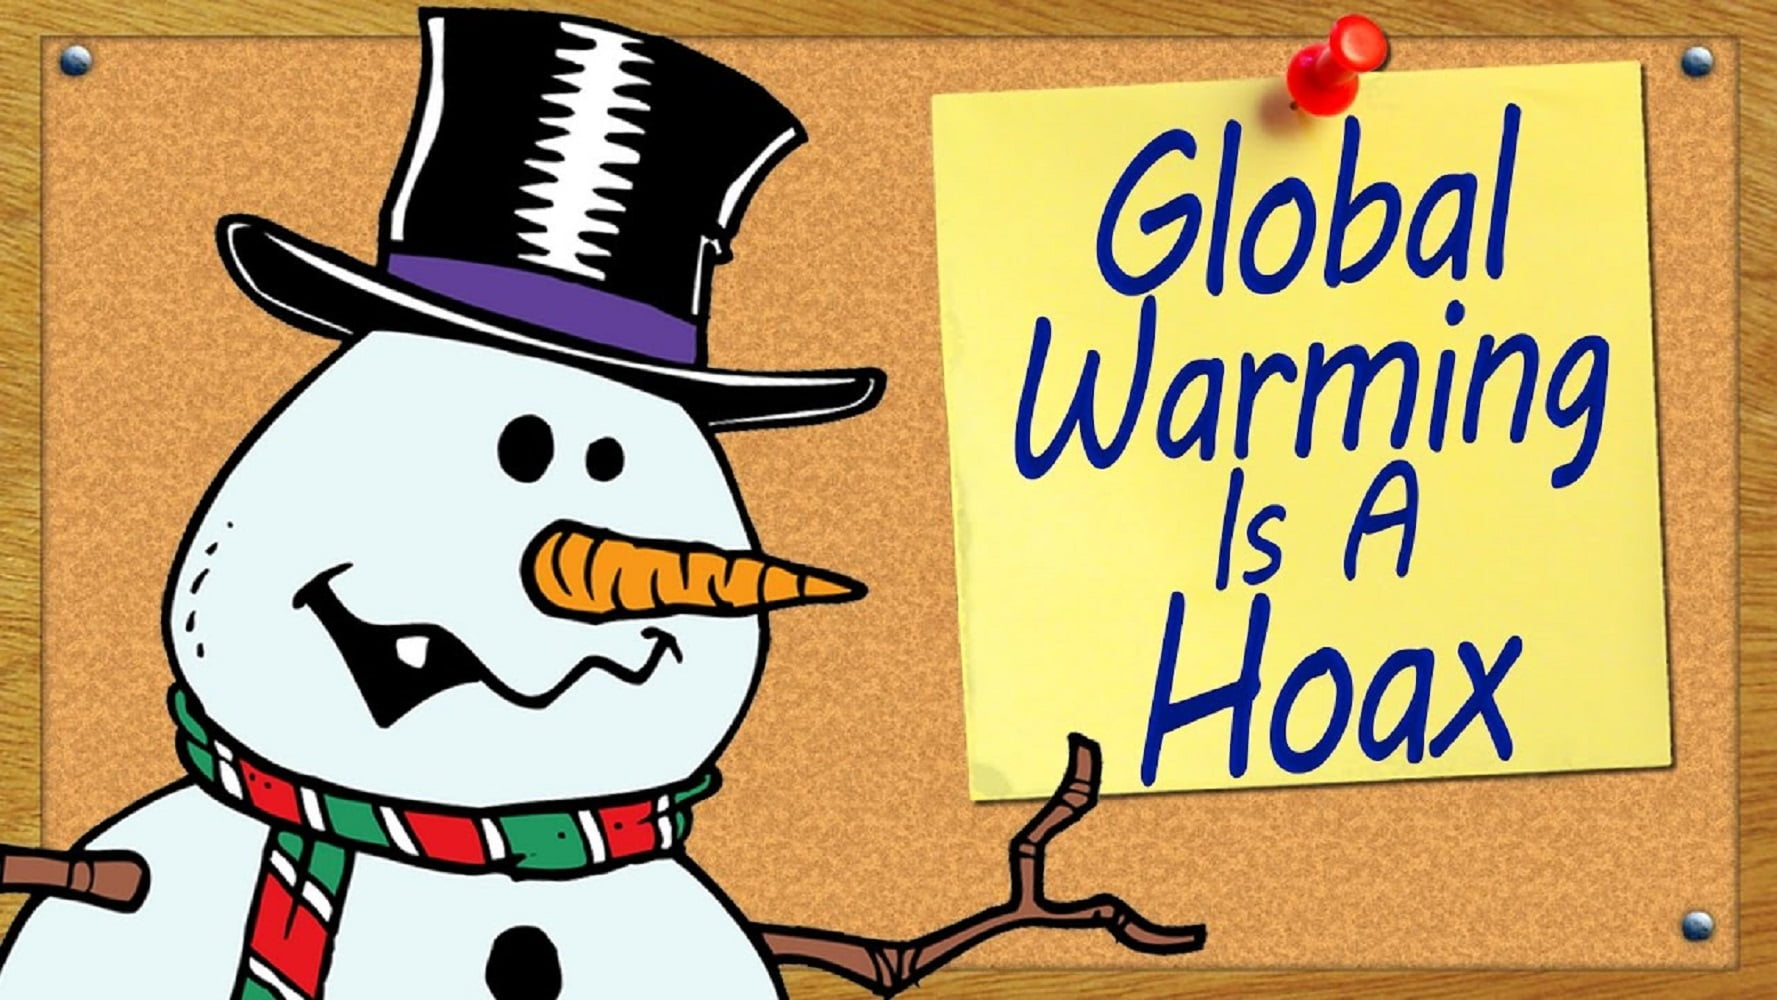 Why do sceptics believe Global Warming is a hoax?